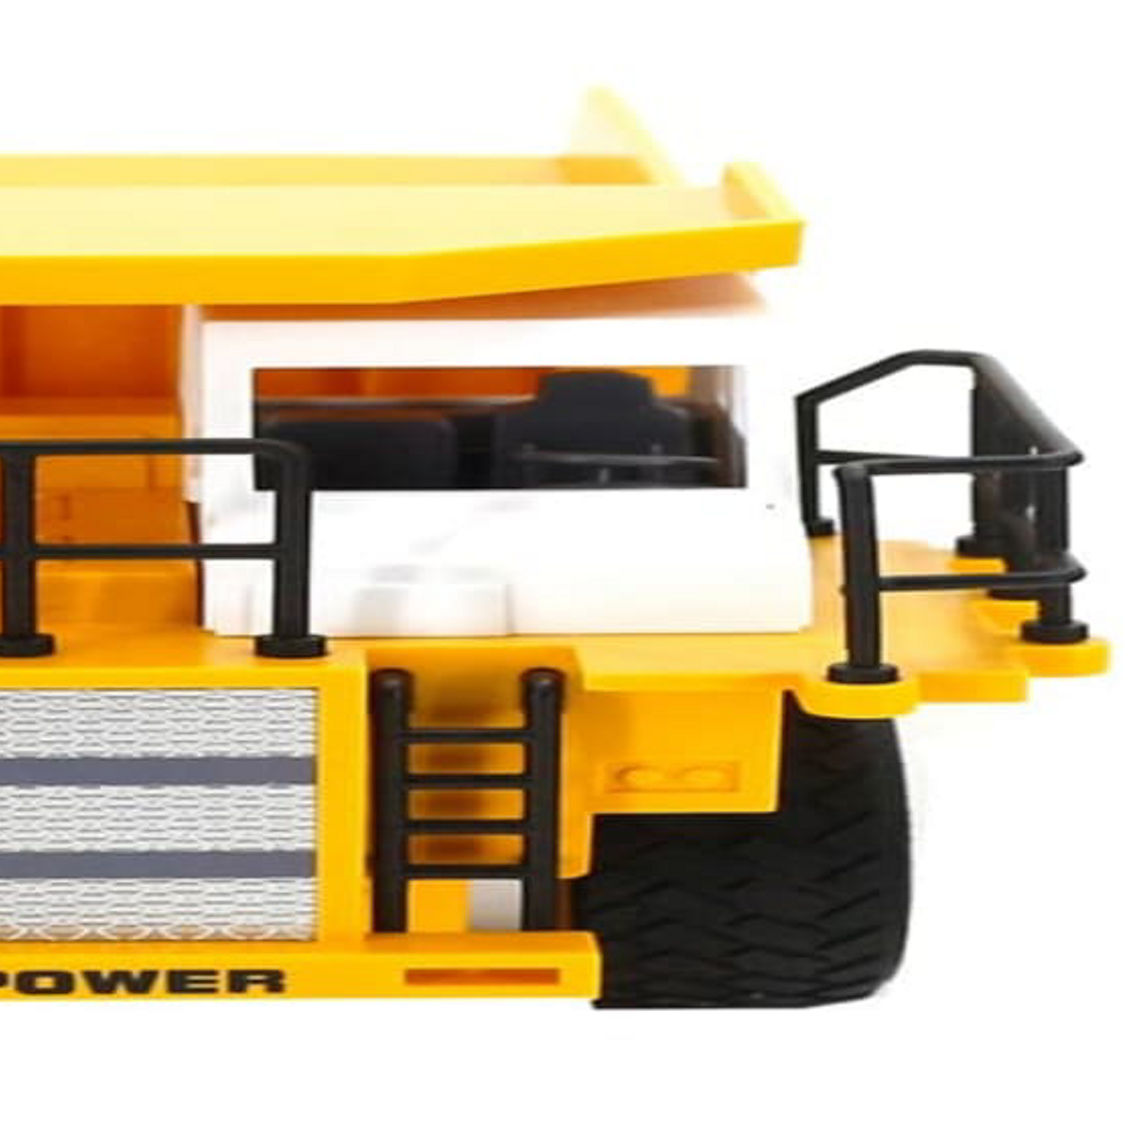 1:24 scale 2.4 GHz 6 channel R/C die cast dump truck. - Image 2 of 5